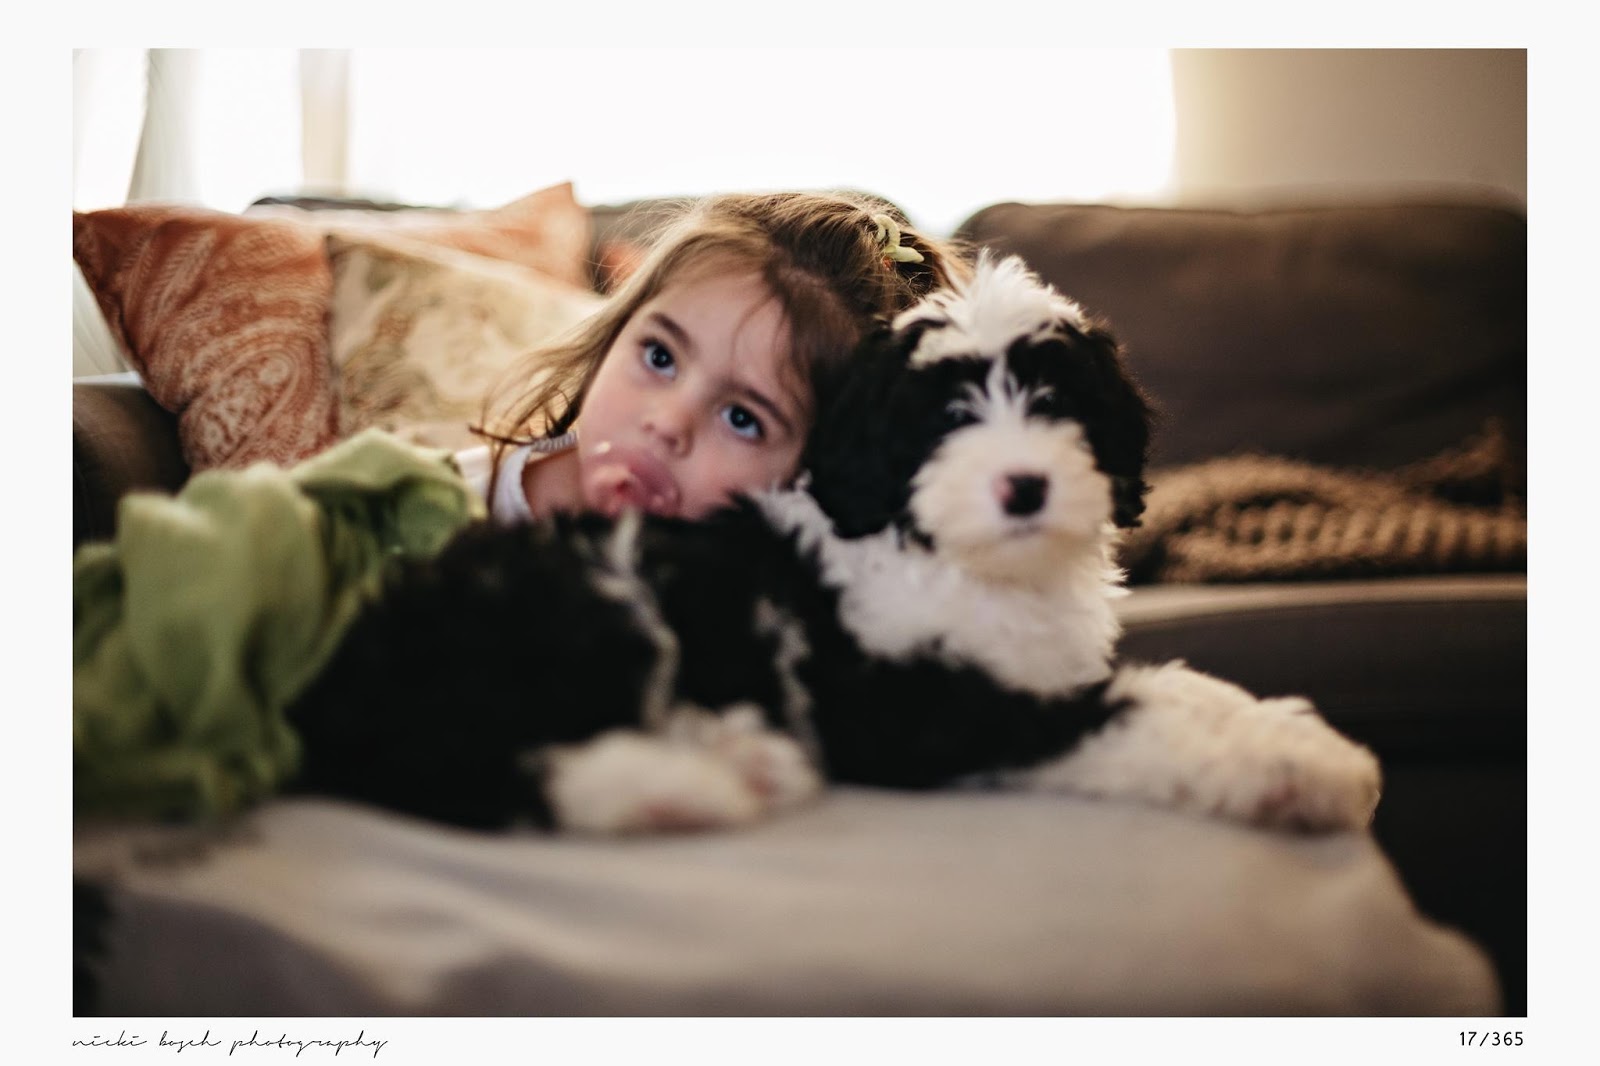 What is a sheepadoodle?